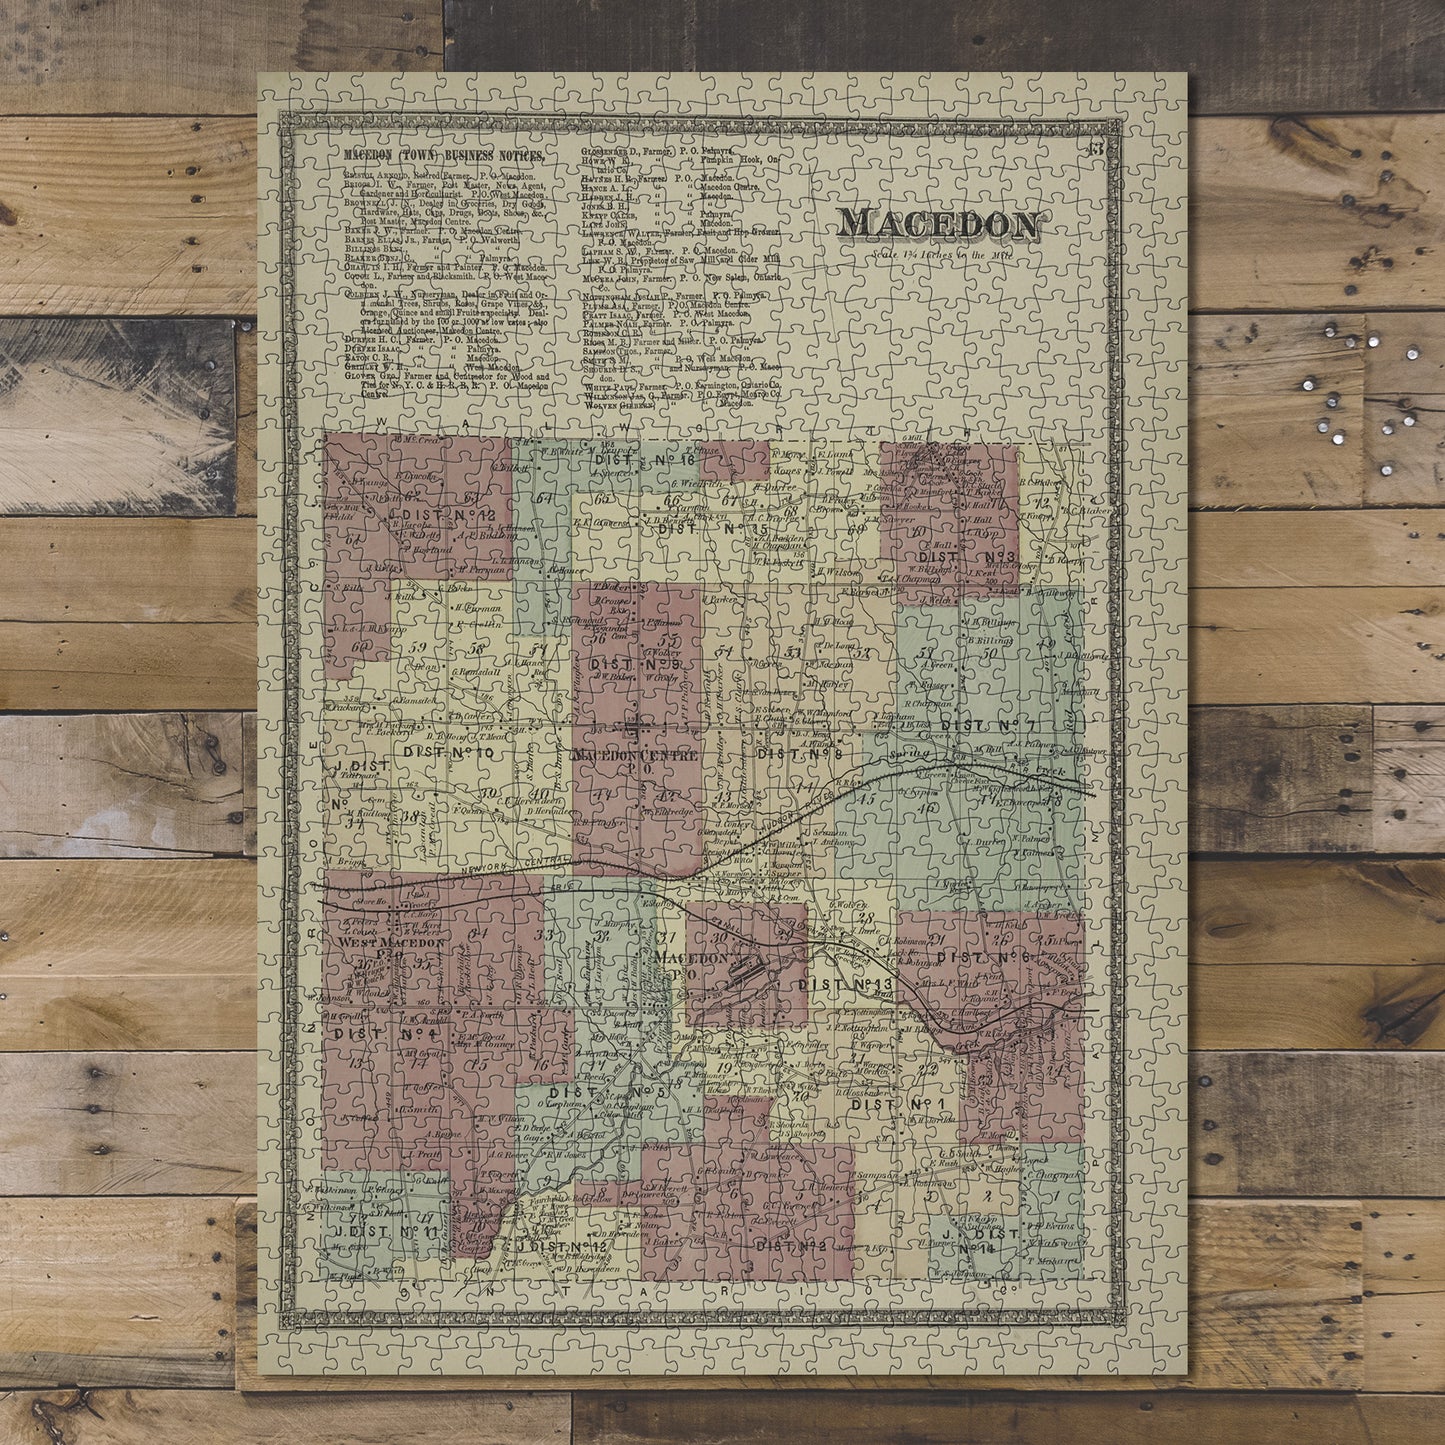 1000 Piece Jigsaw Puzzle 1874 Map of Philadelphia Macedon (Town) Business Notices